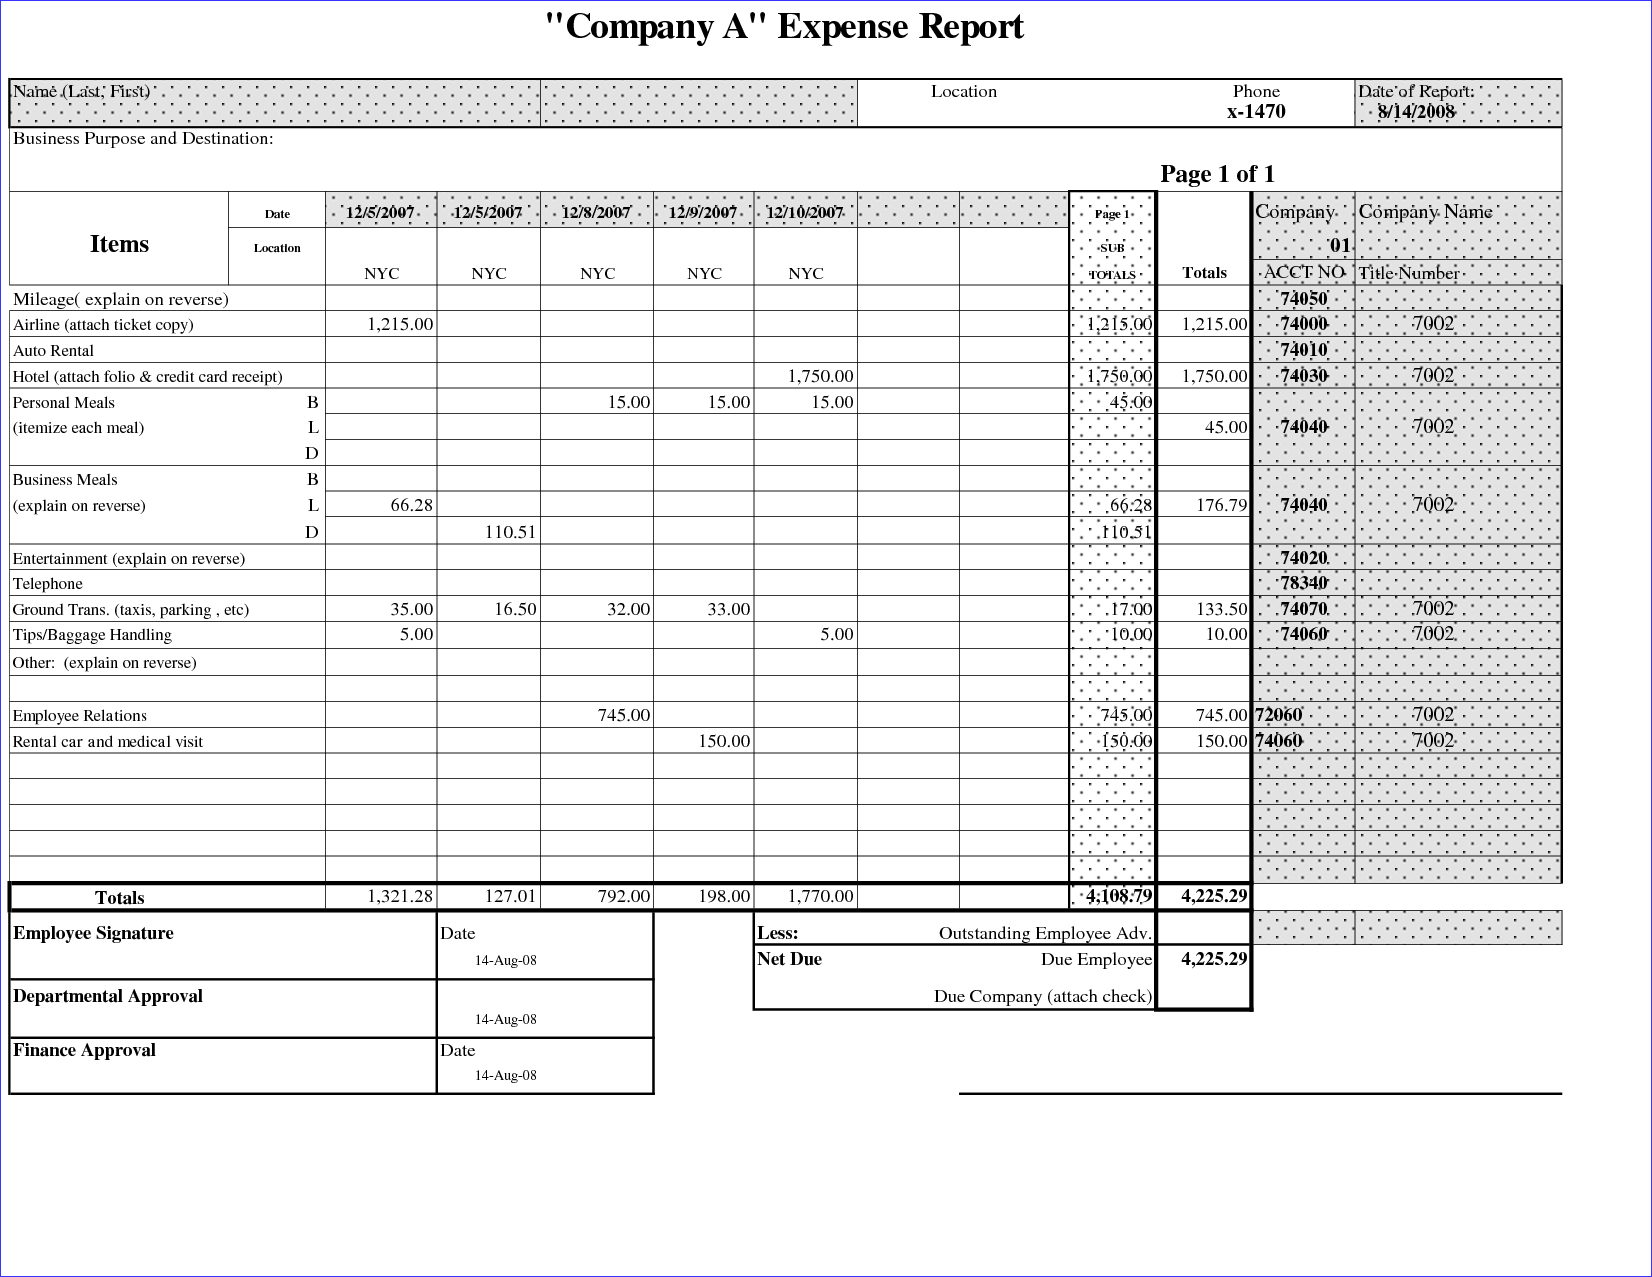 025 Business Expense Report Template Basic Company With Intended For Company Expense Report Template